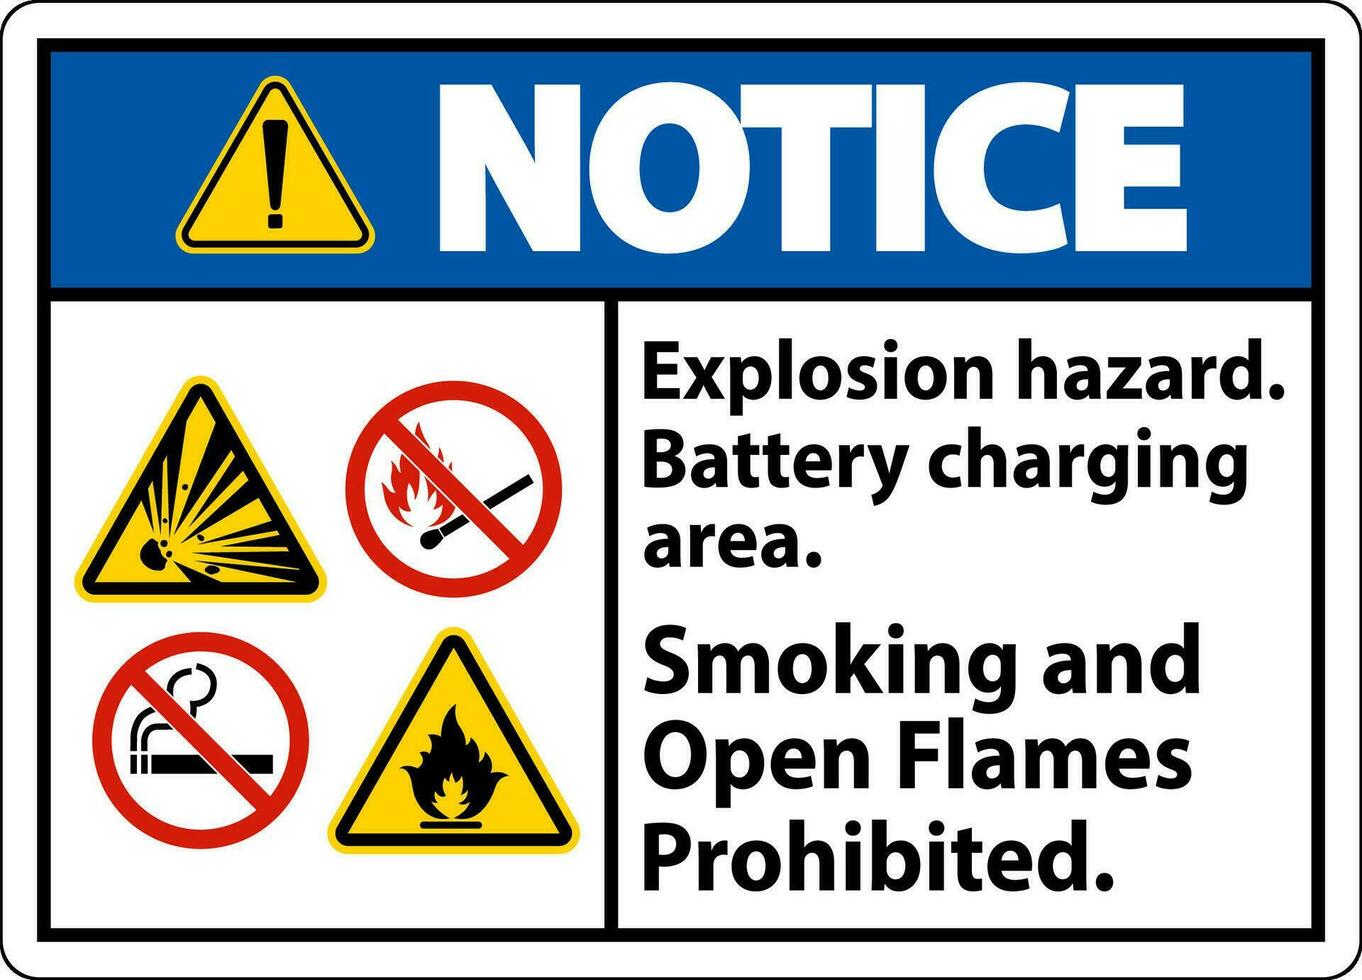 Notice Sign Explosion Hazard, Battery Charging Area, Smoking And Open Flames Prohibited vector